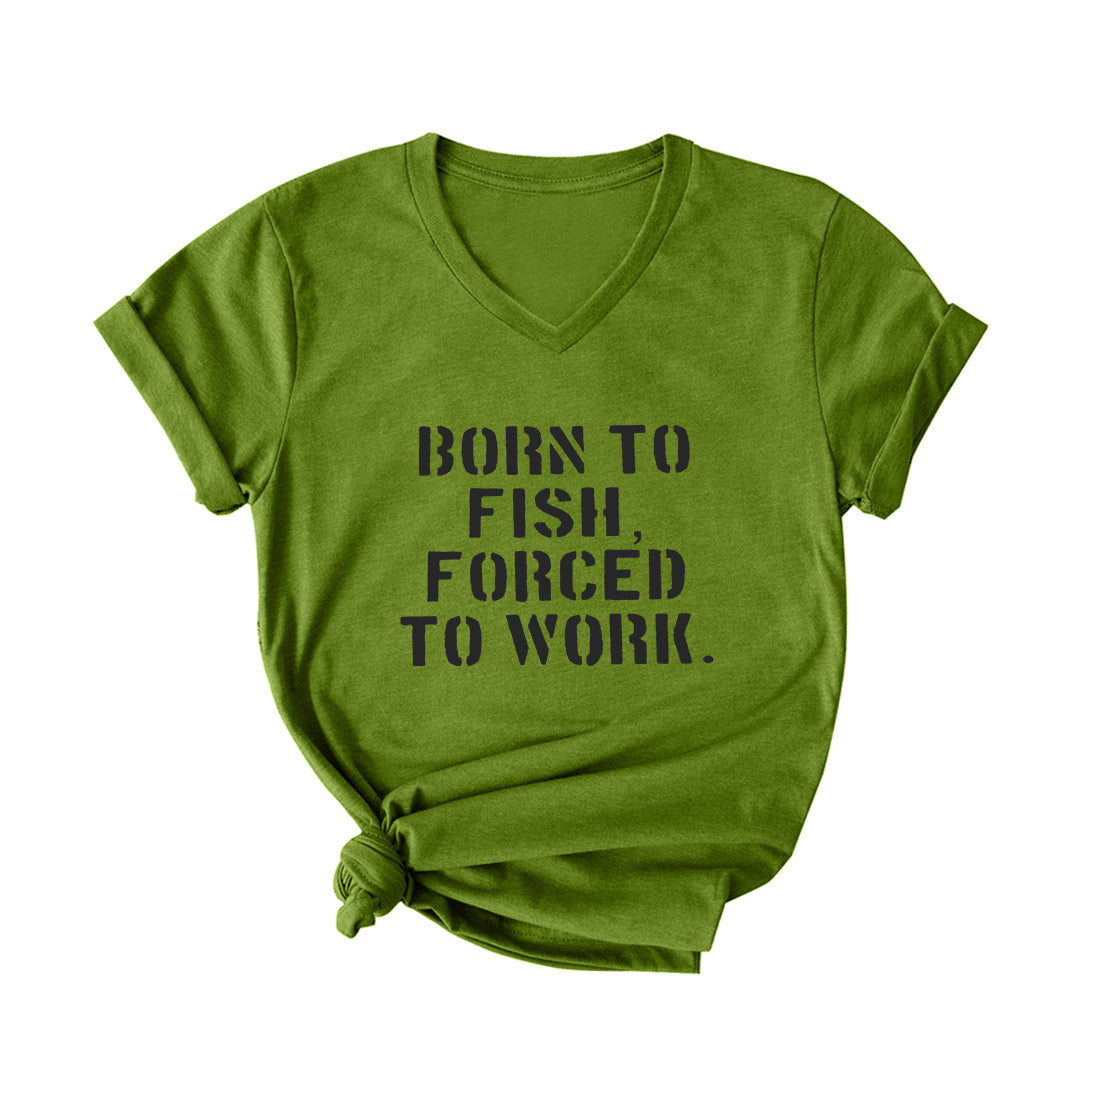 BORN TO FISH FORCED TO WORK V Neck T-Shirt for Women